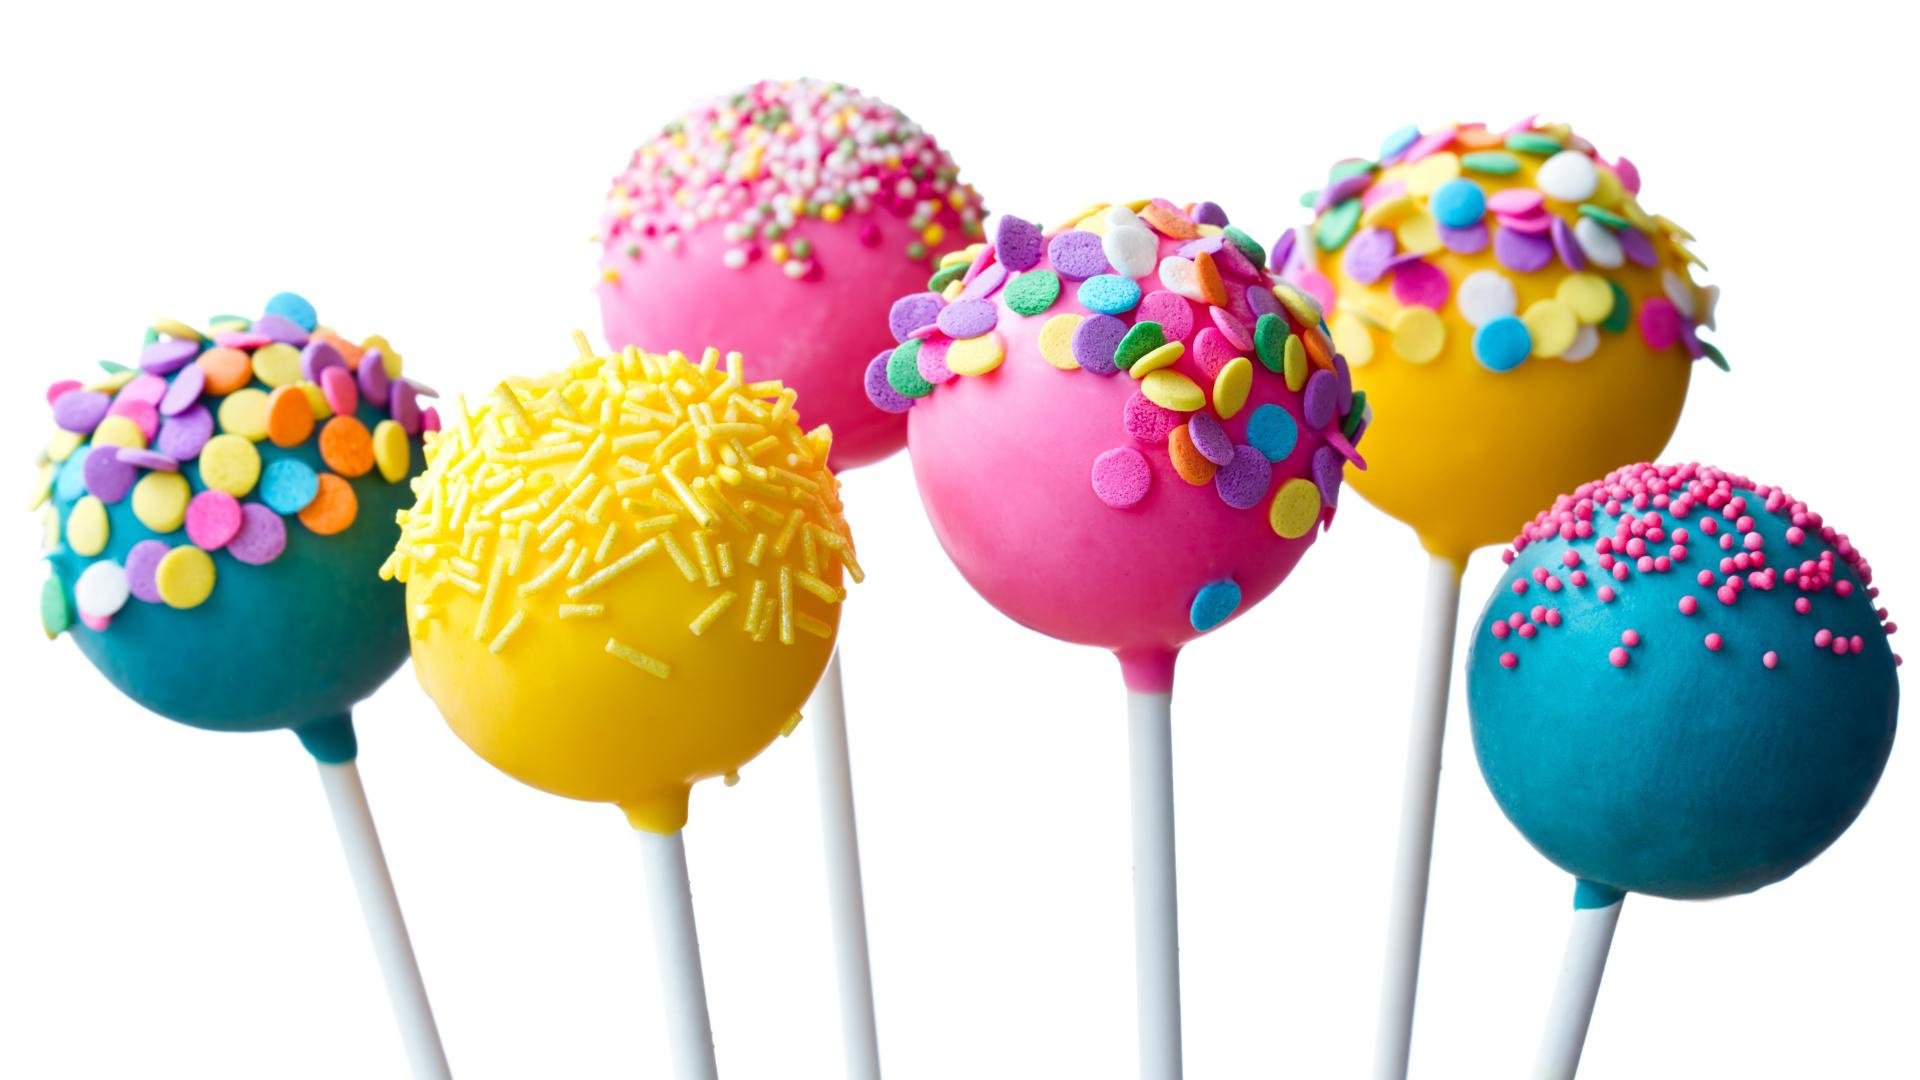 Sprint Galaxy S5 Will Get Android 5.0 Lollipop Today